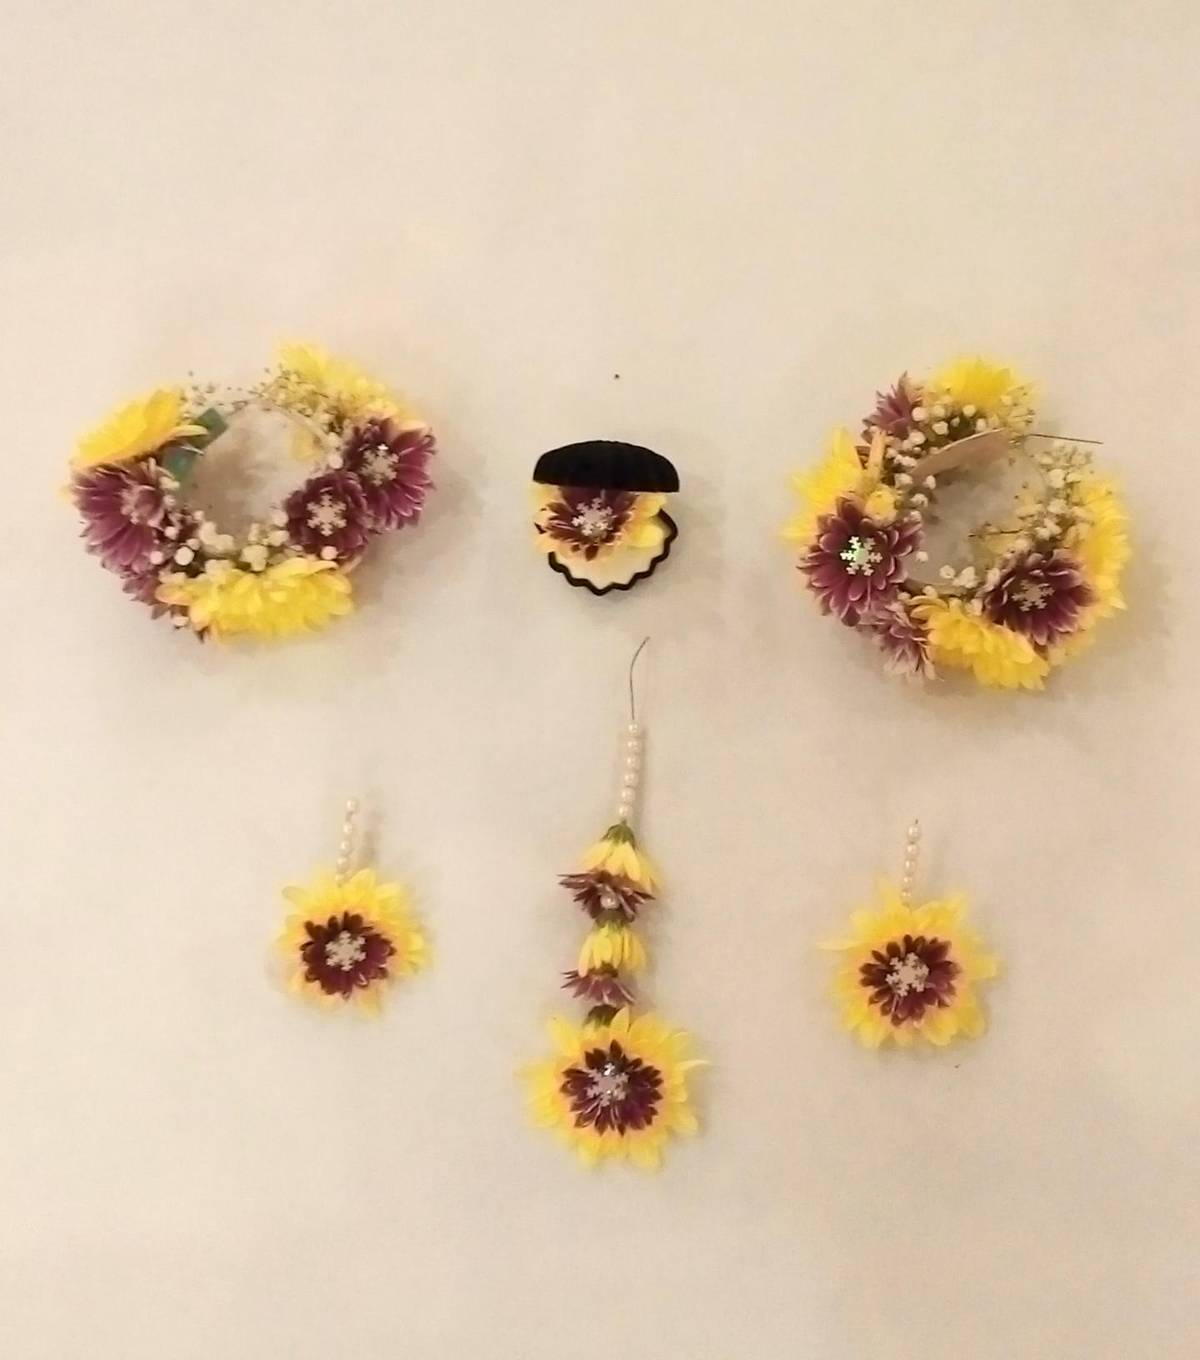 bloomed adornments set